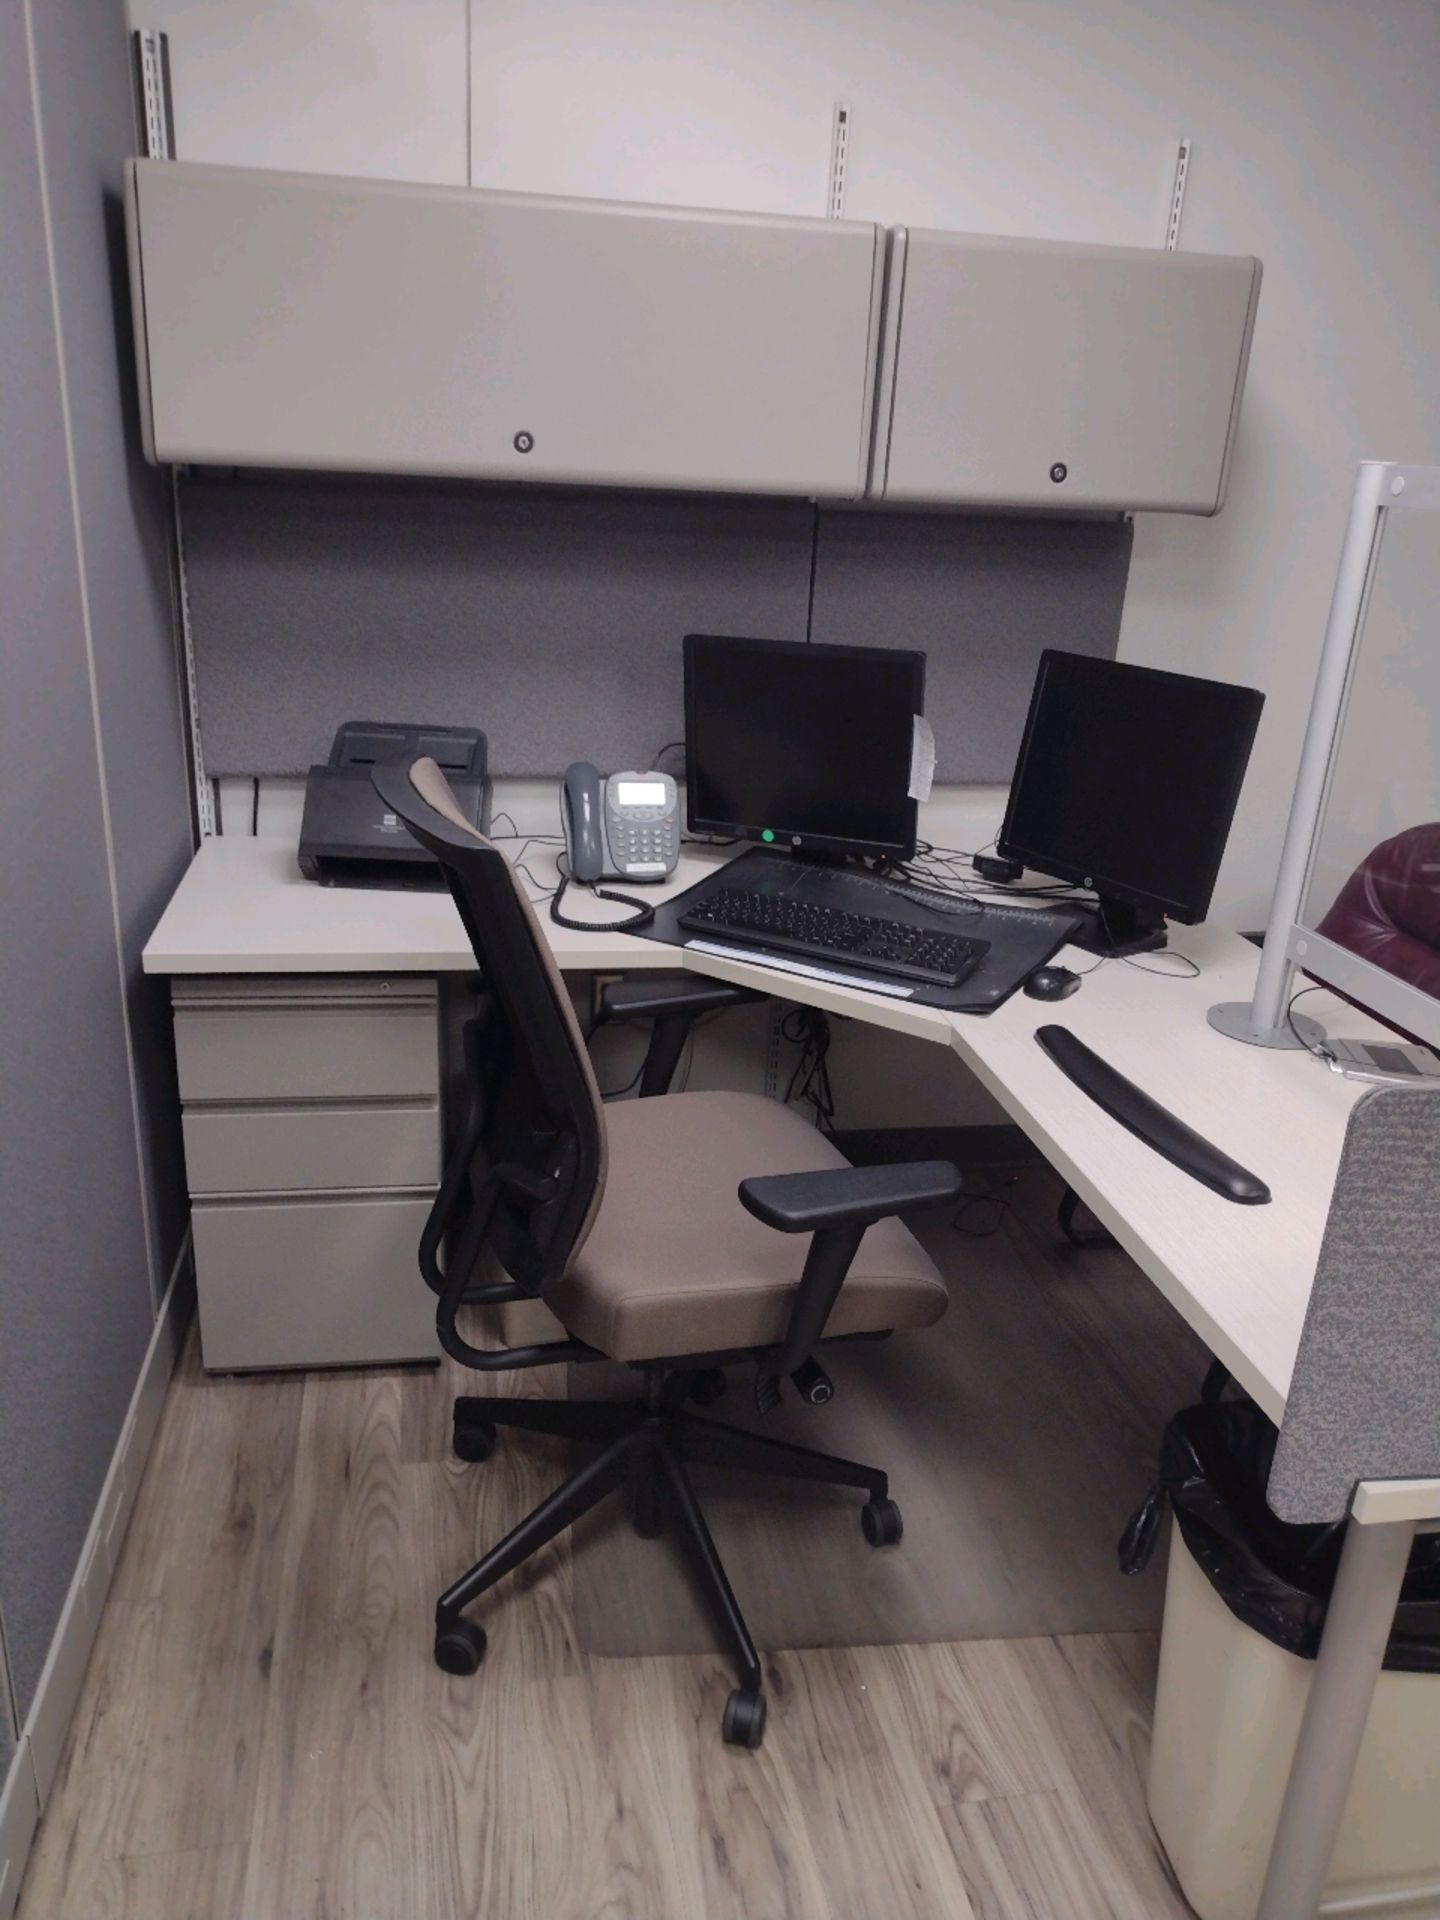 OFFICE SUITE INCLUDE: 6 WORKSTATION CUBICLE, LEXMARK PRINTER, HP PRINTER, 3- CANON DR-C130